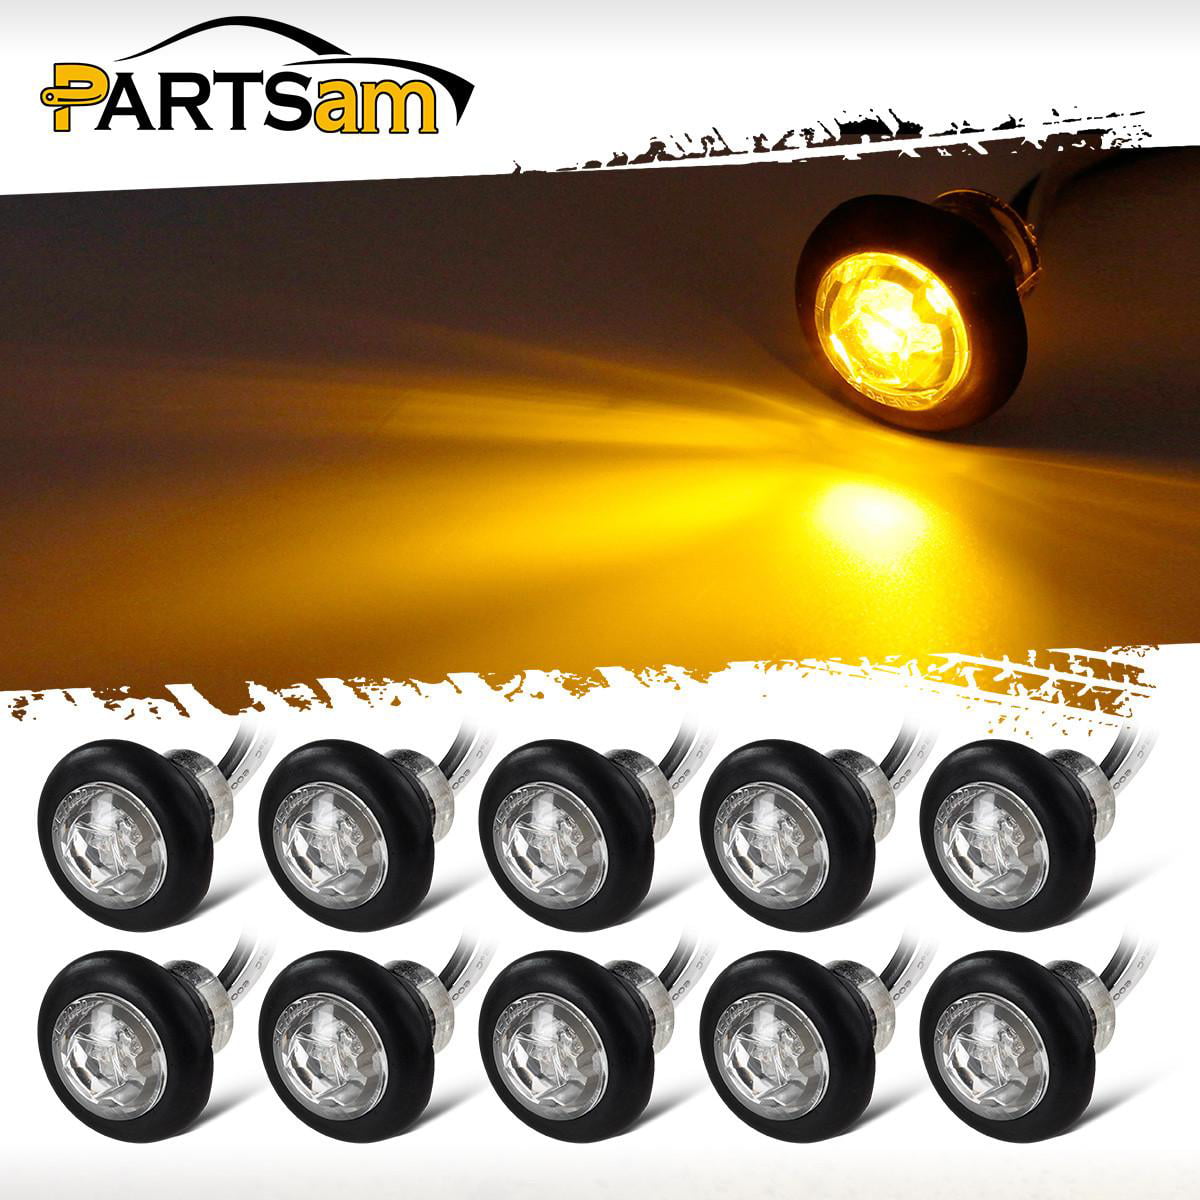 10x EASY FIT AMBER LED SIDE MARKER LAMPS/LIGHTS TRUCK VAN BAR **NO CUT OUT**